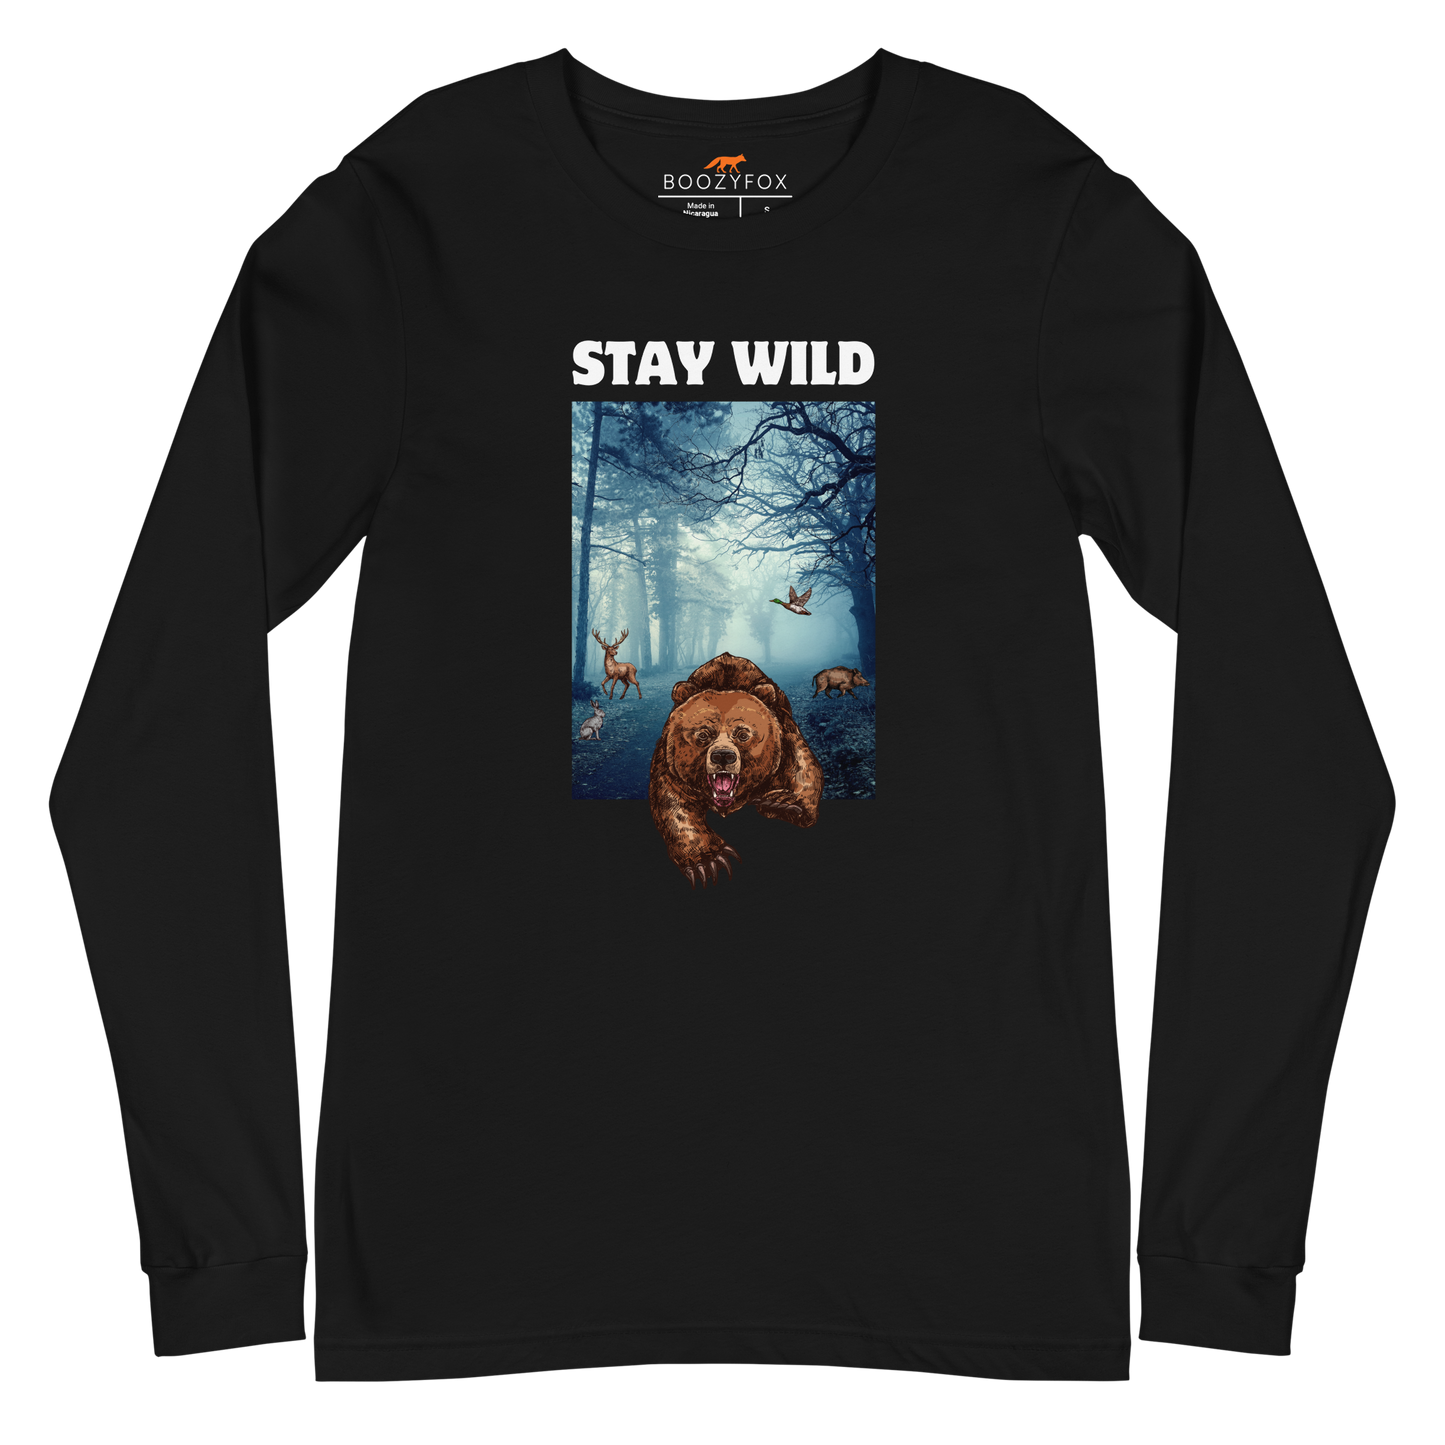 Black Bear Long Sleeve Tee featuring a Stay Wild graphic on the chest - Cool Bear Long Sleeve Graphic Tees - Boozy Fox